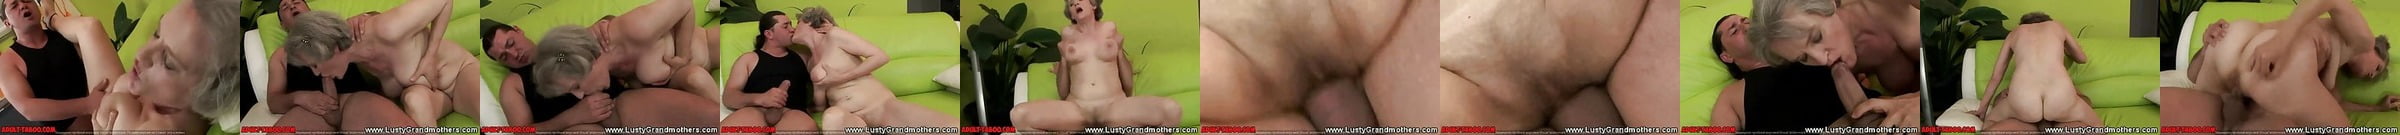 Featured Mature Granny Porn Videos 4 Xhamster